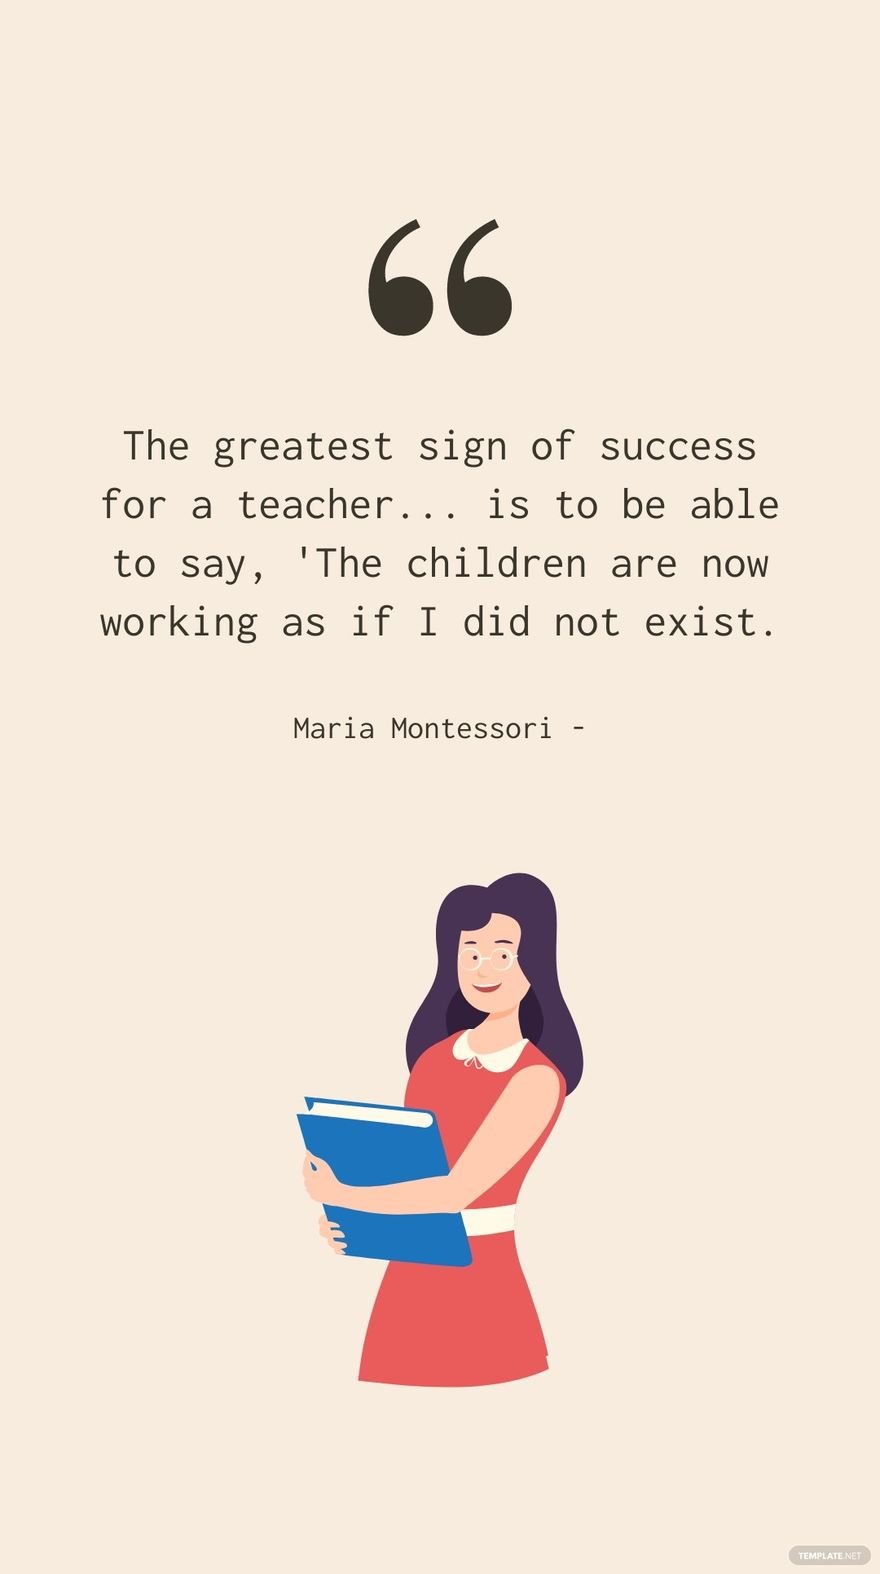 Maria Montessori - The greatest sign of success for a teacher... is to be able to say, 'The children are now working as if I did not exist.'